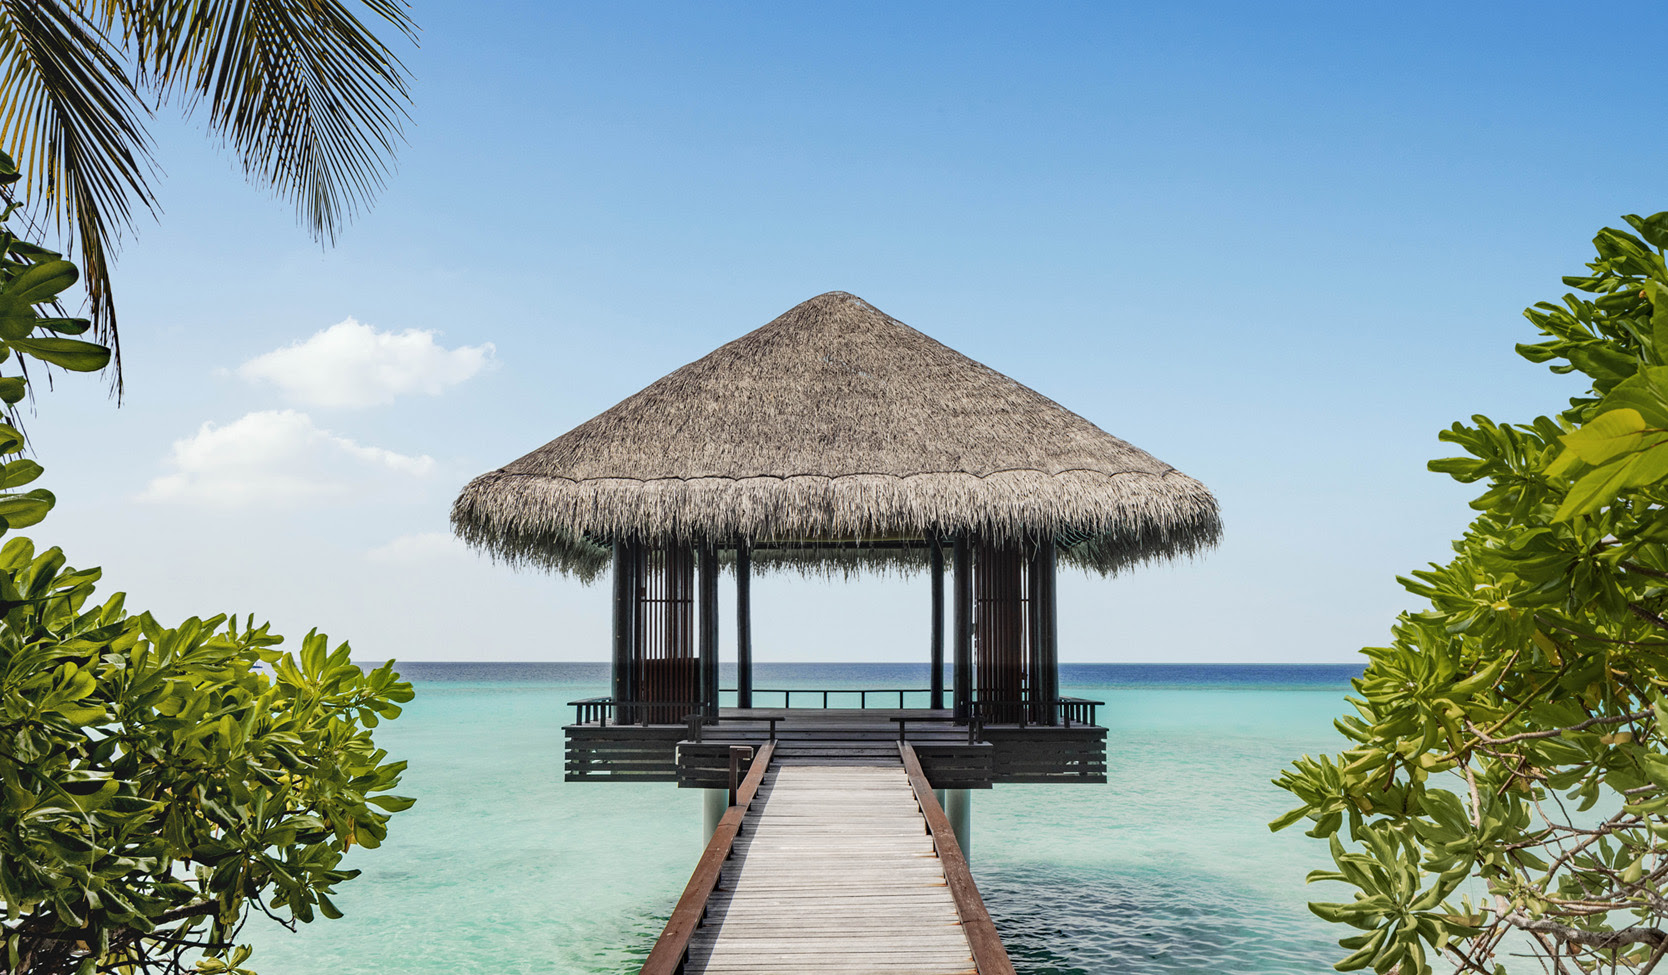 A stay at One&Only Reethi Rah